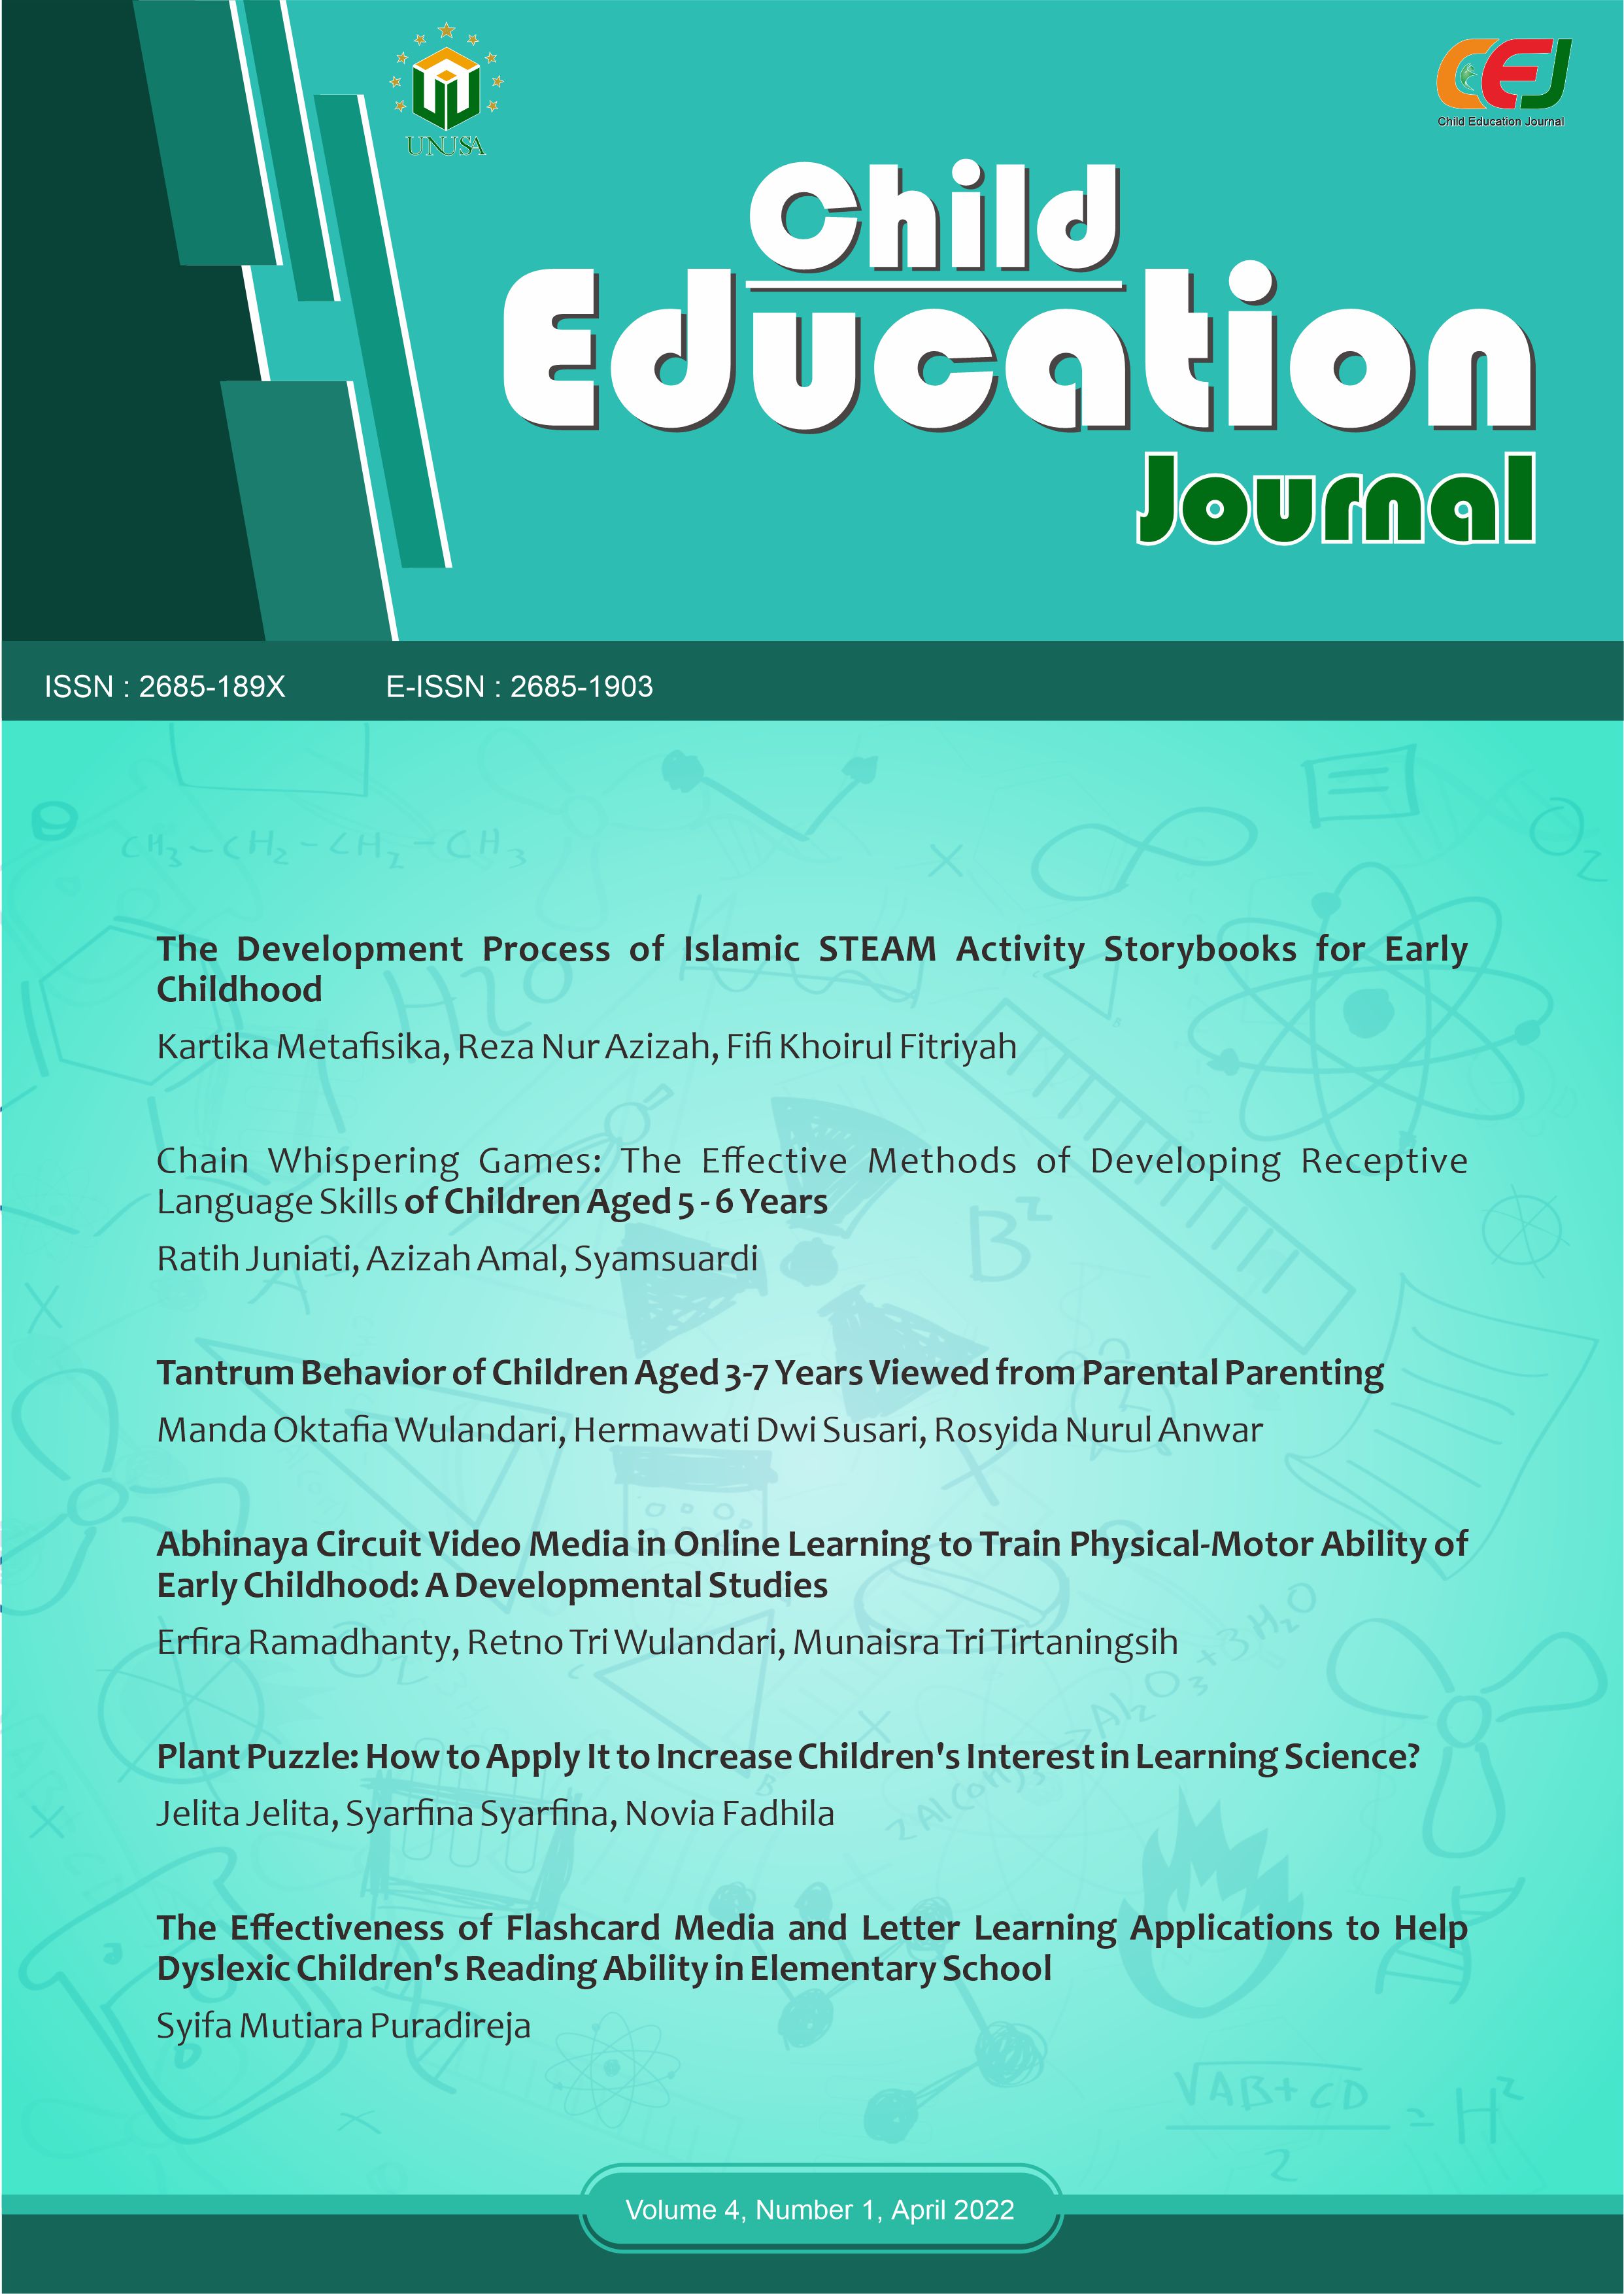 					View Vol. 4 No. 1 (2022): Child Education Journal 
				